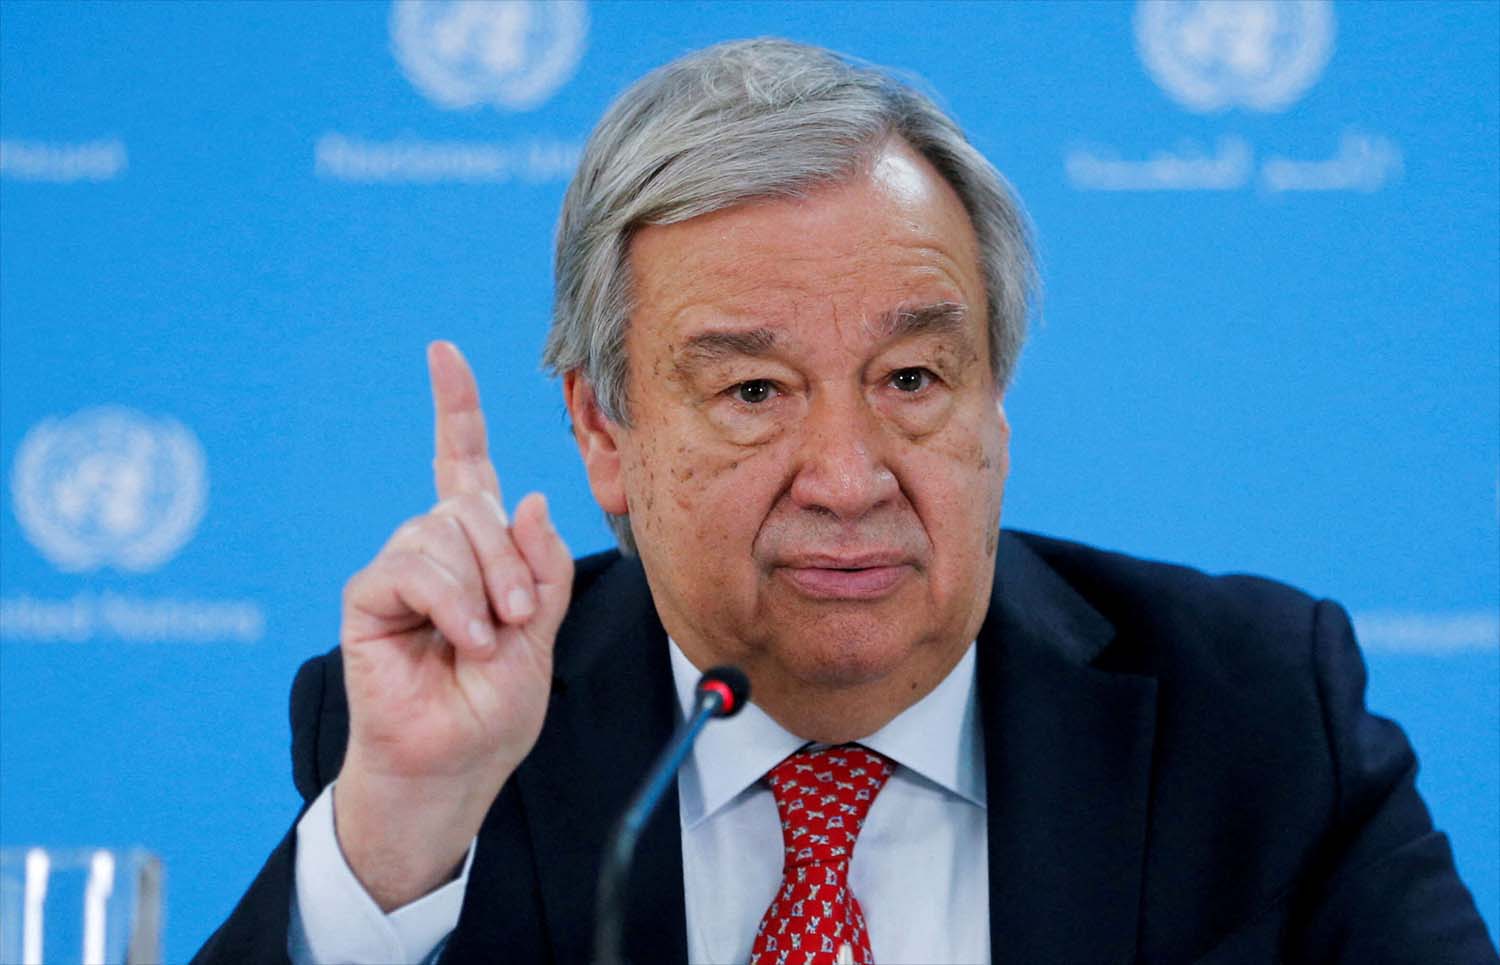 Guterres said there was no self-determination when Spain handed the Sahara to Morocco and Mauritania